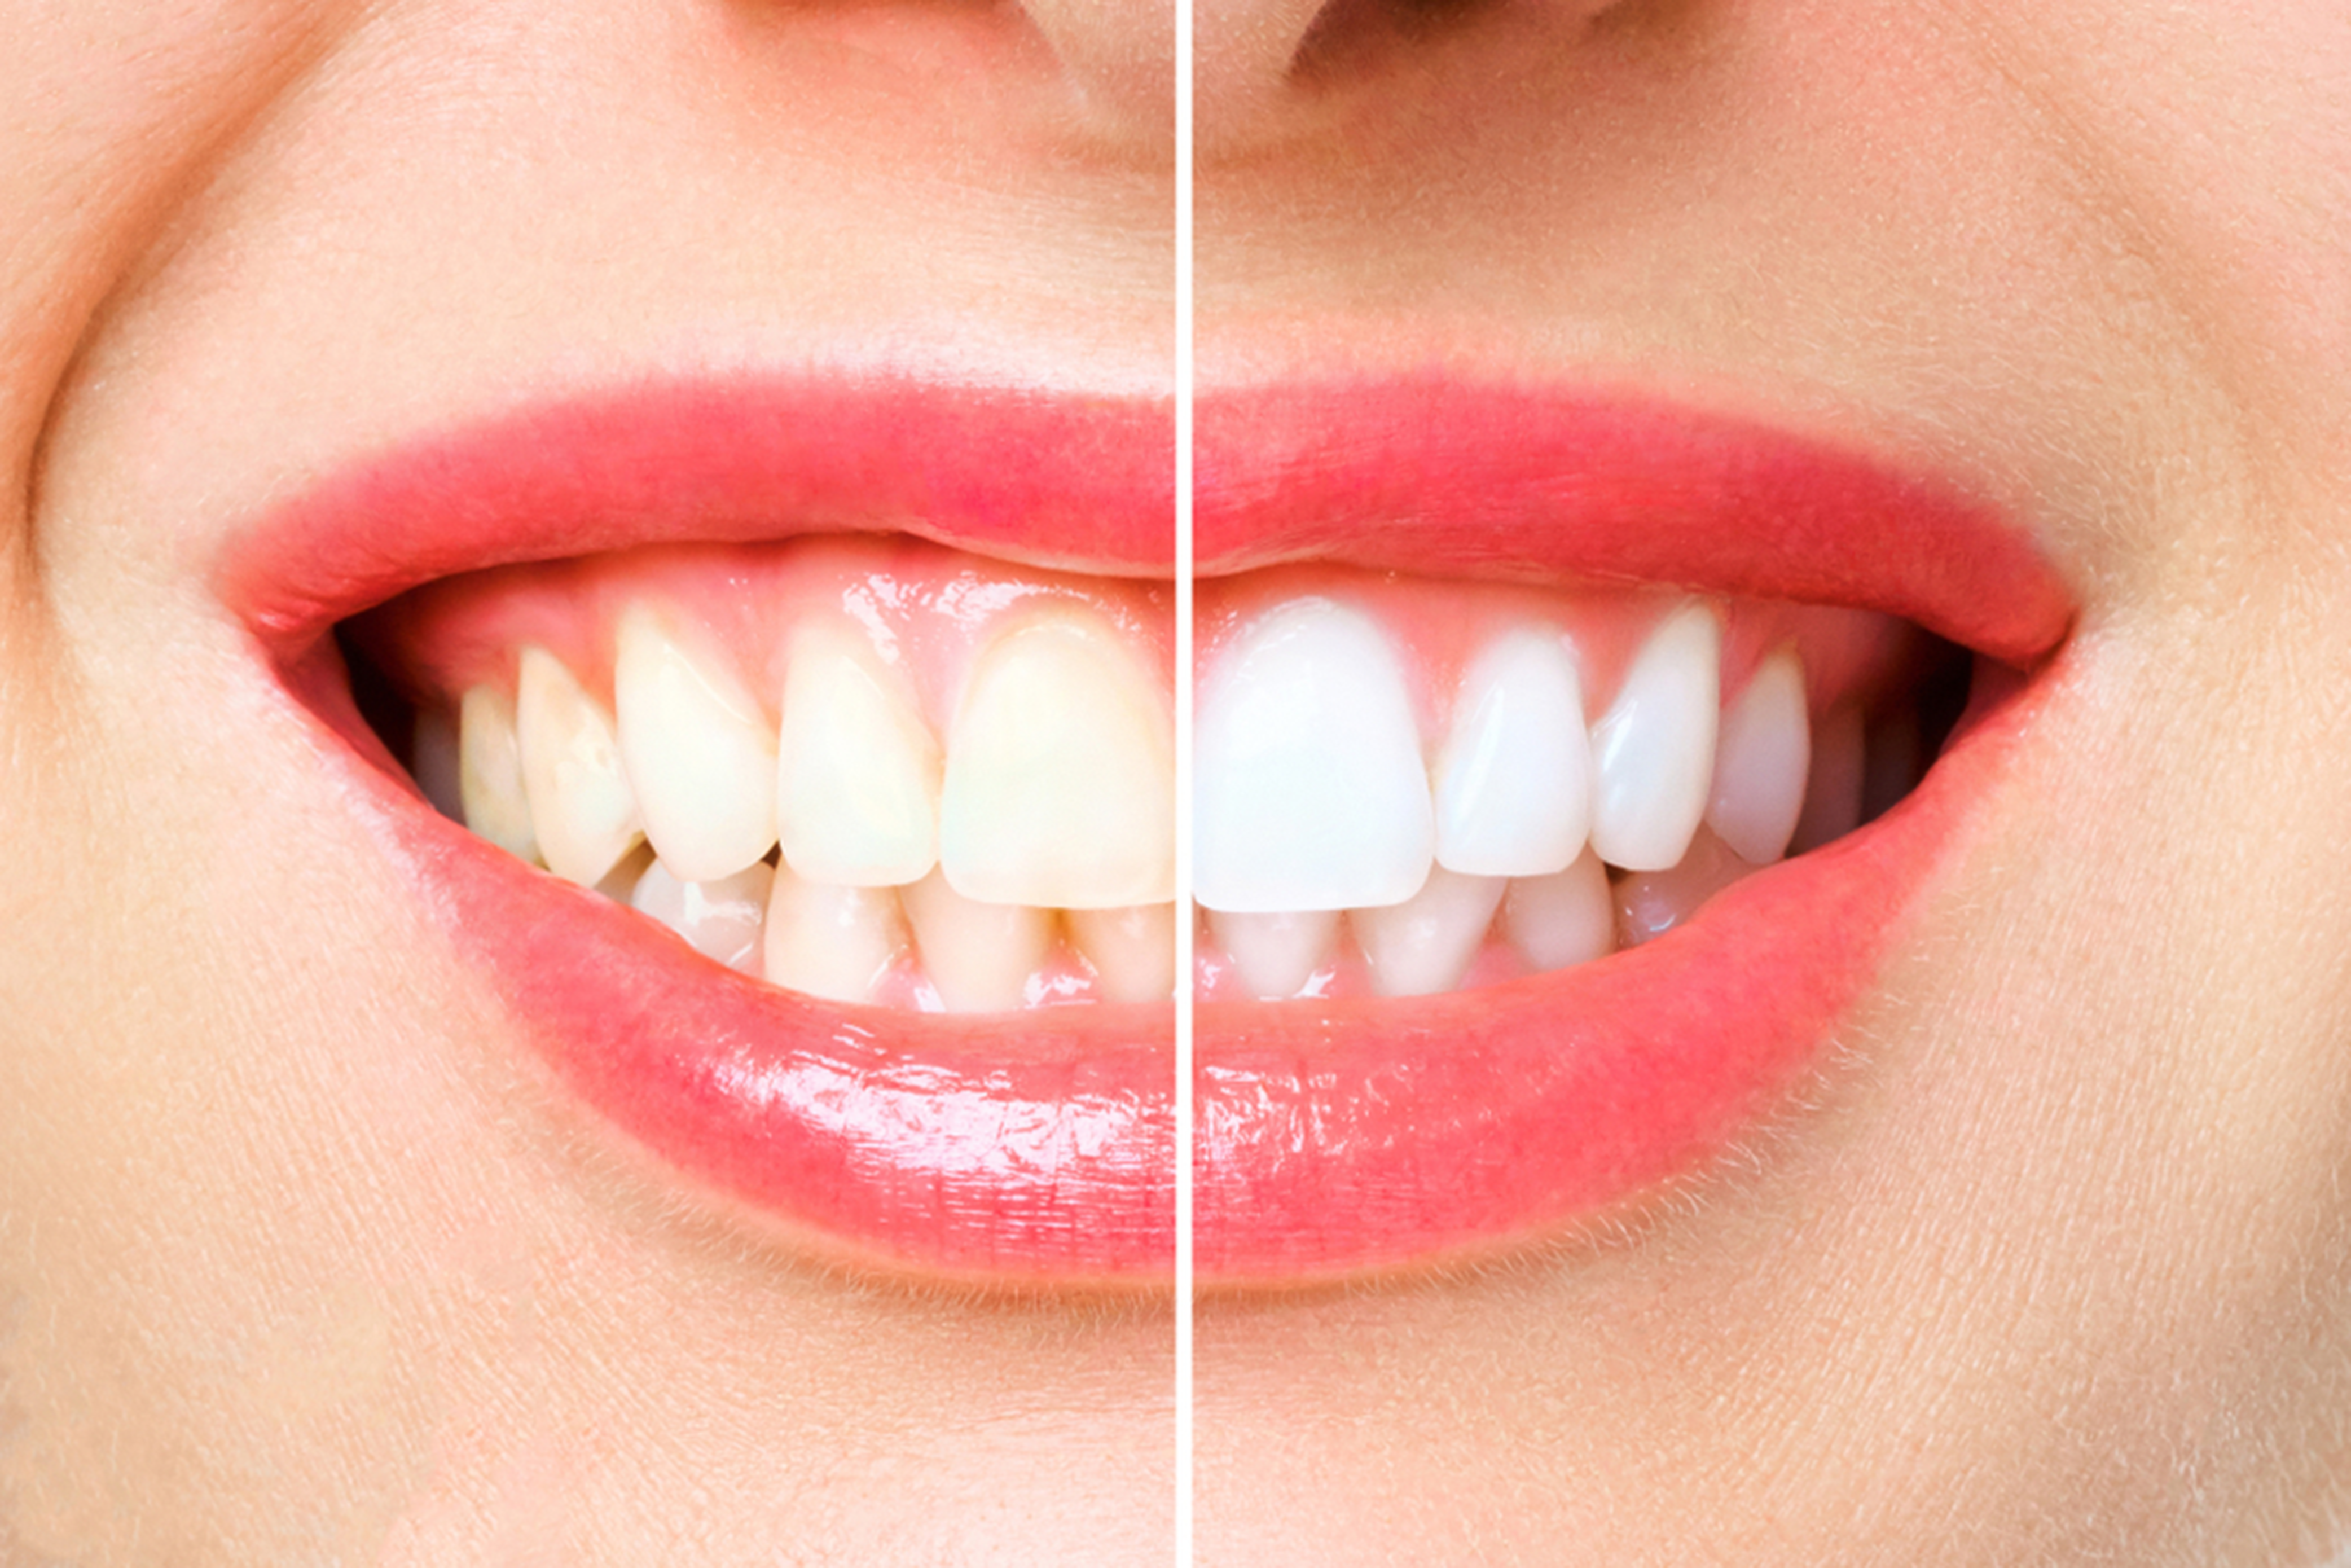 What to expect during teeth whitening treatment